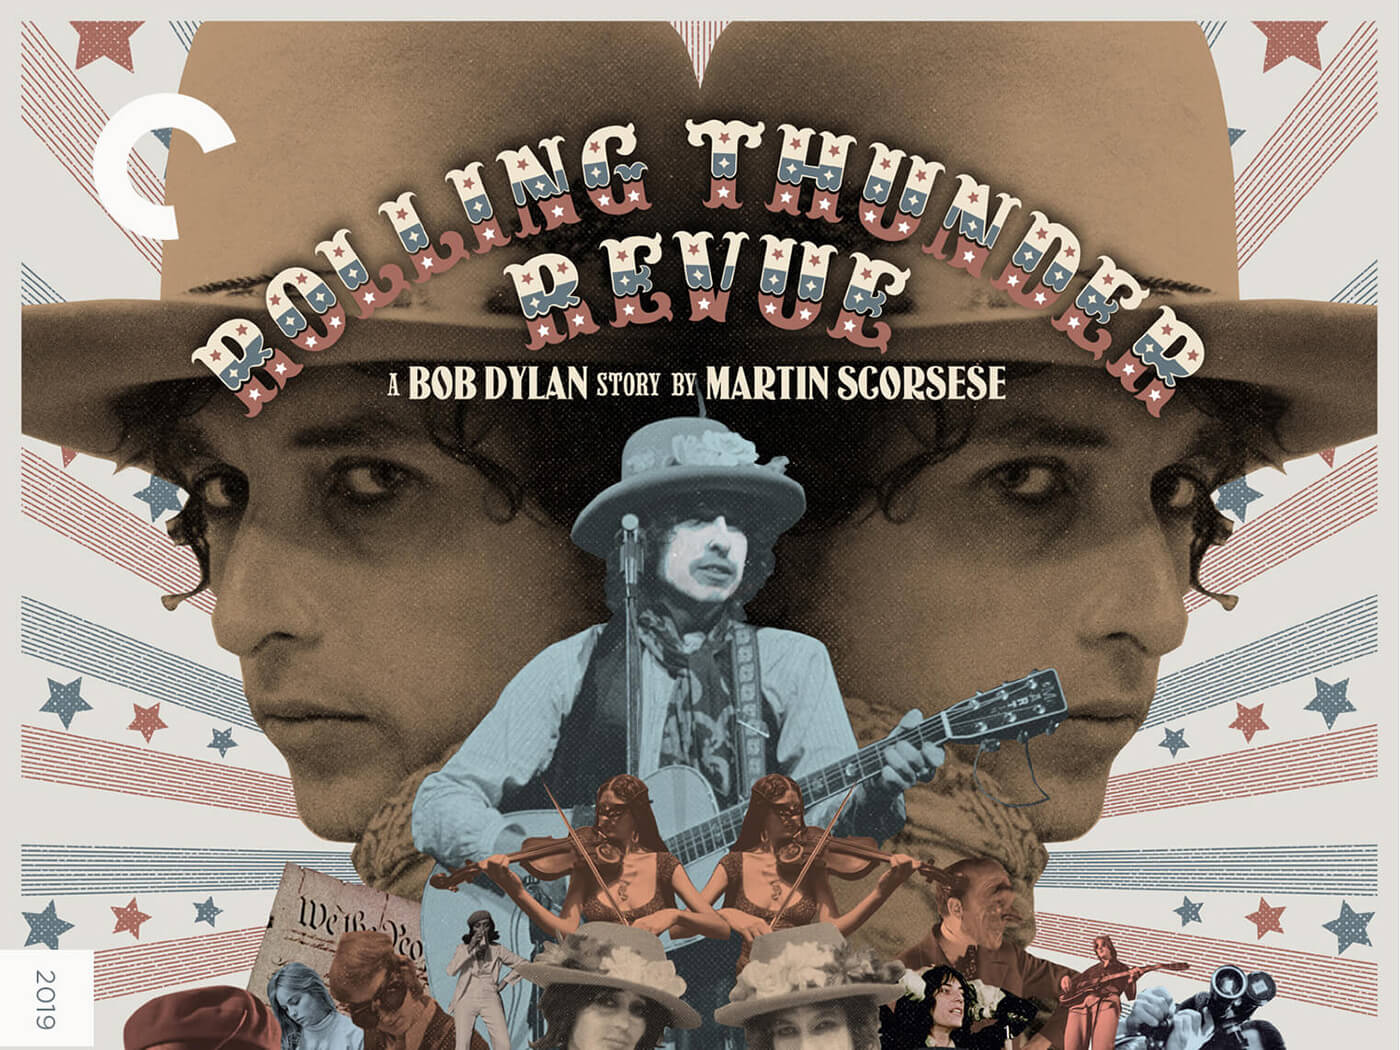 Bob Dylan's Rolling Thunder Revue by Martin Scorsese